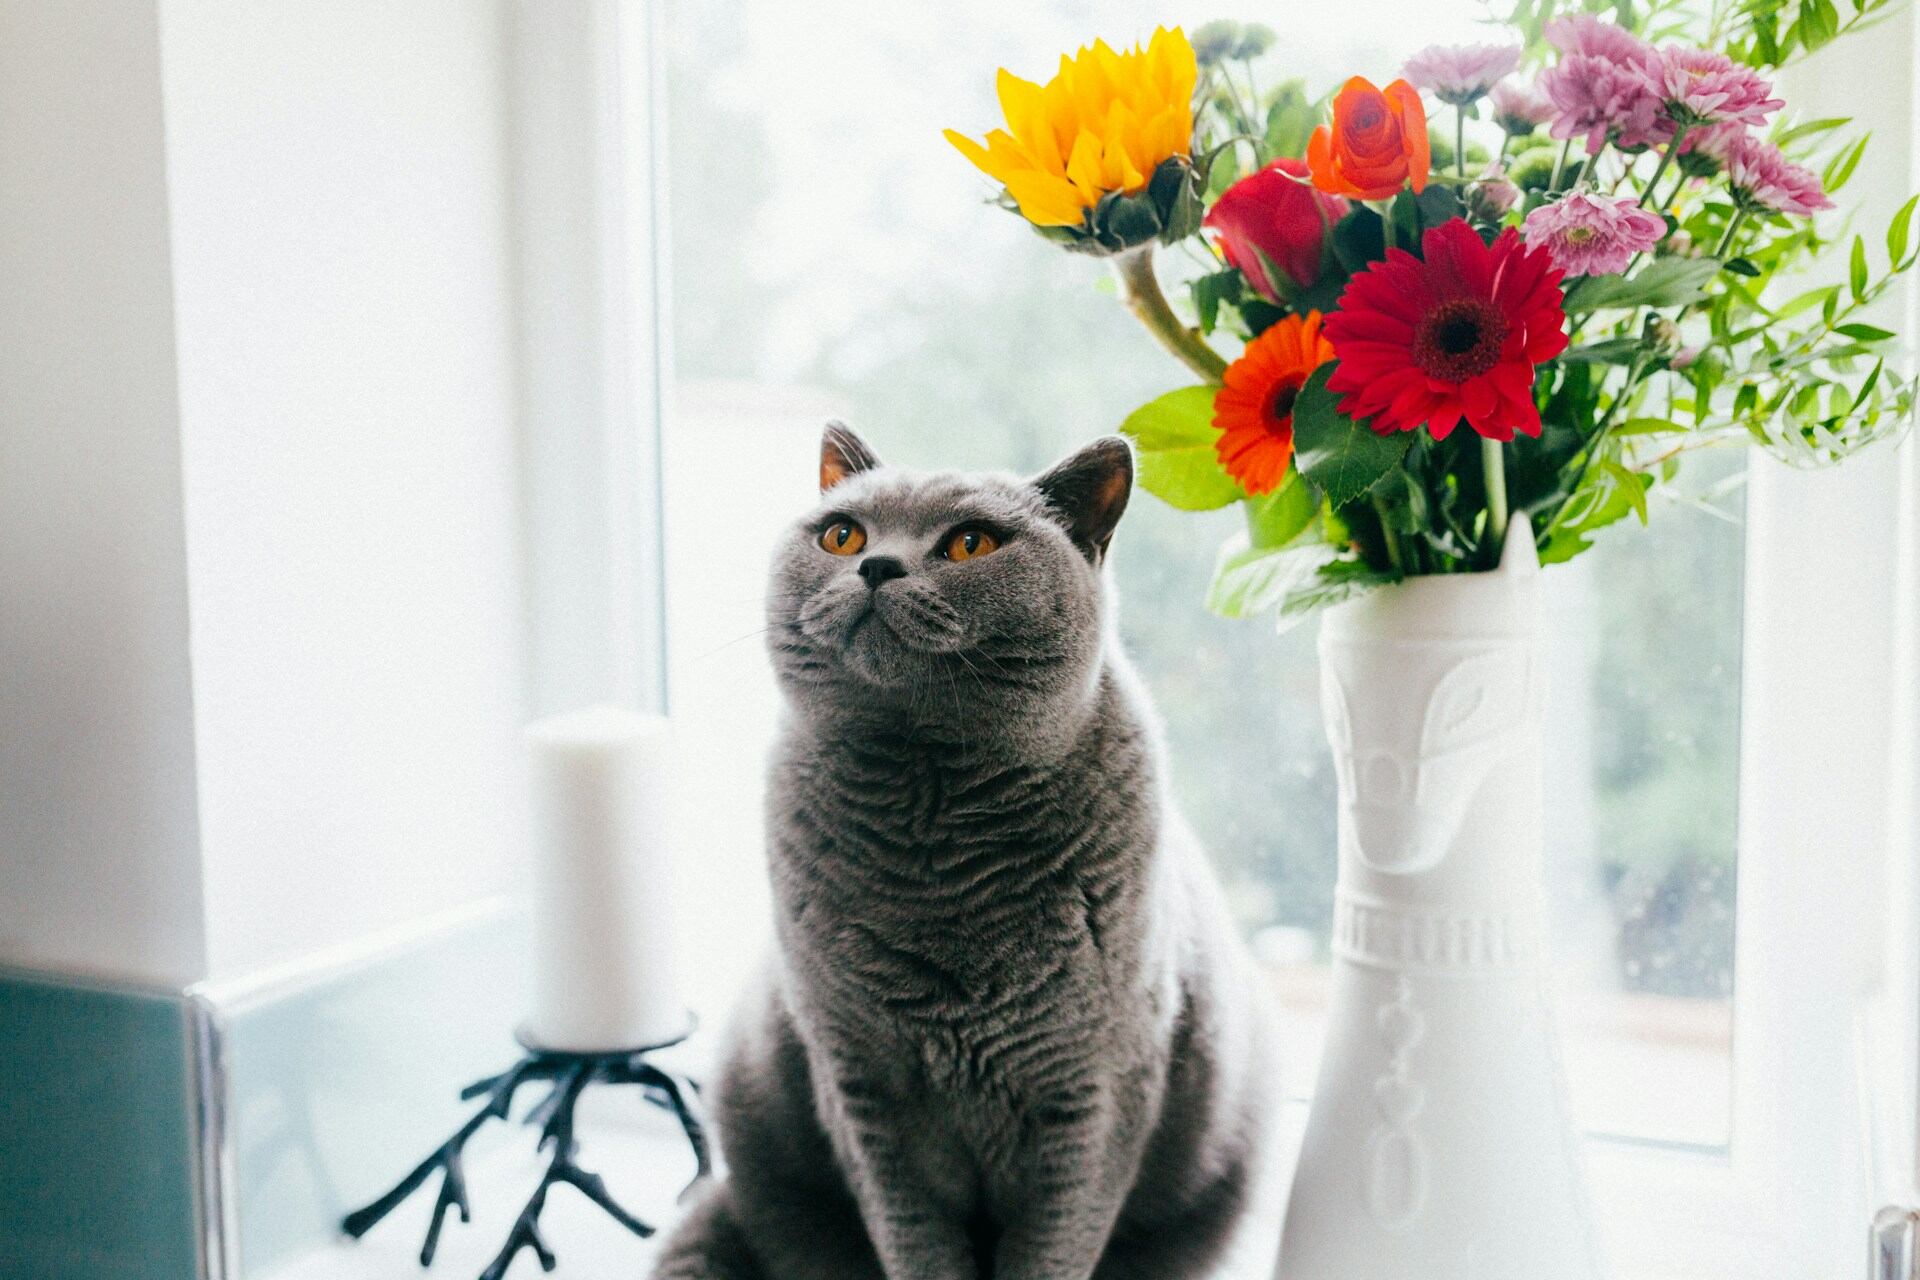 A British Shorthair cat sitting by a white vase of flowers